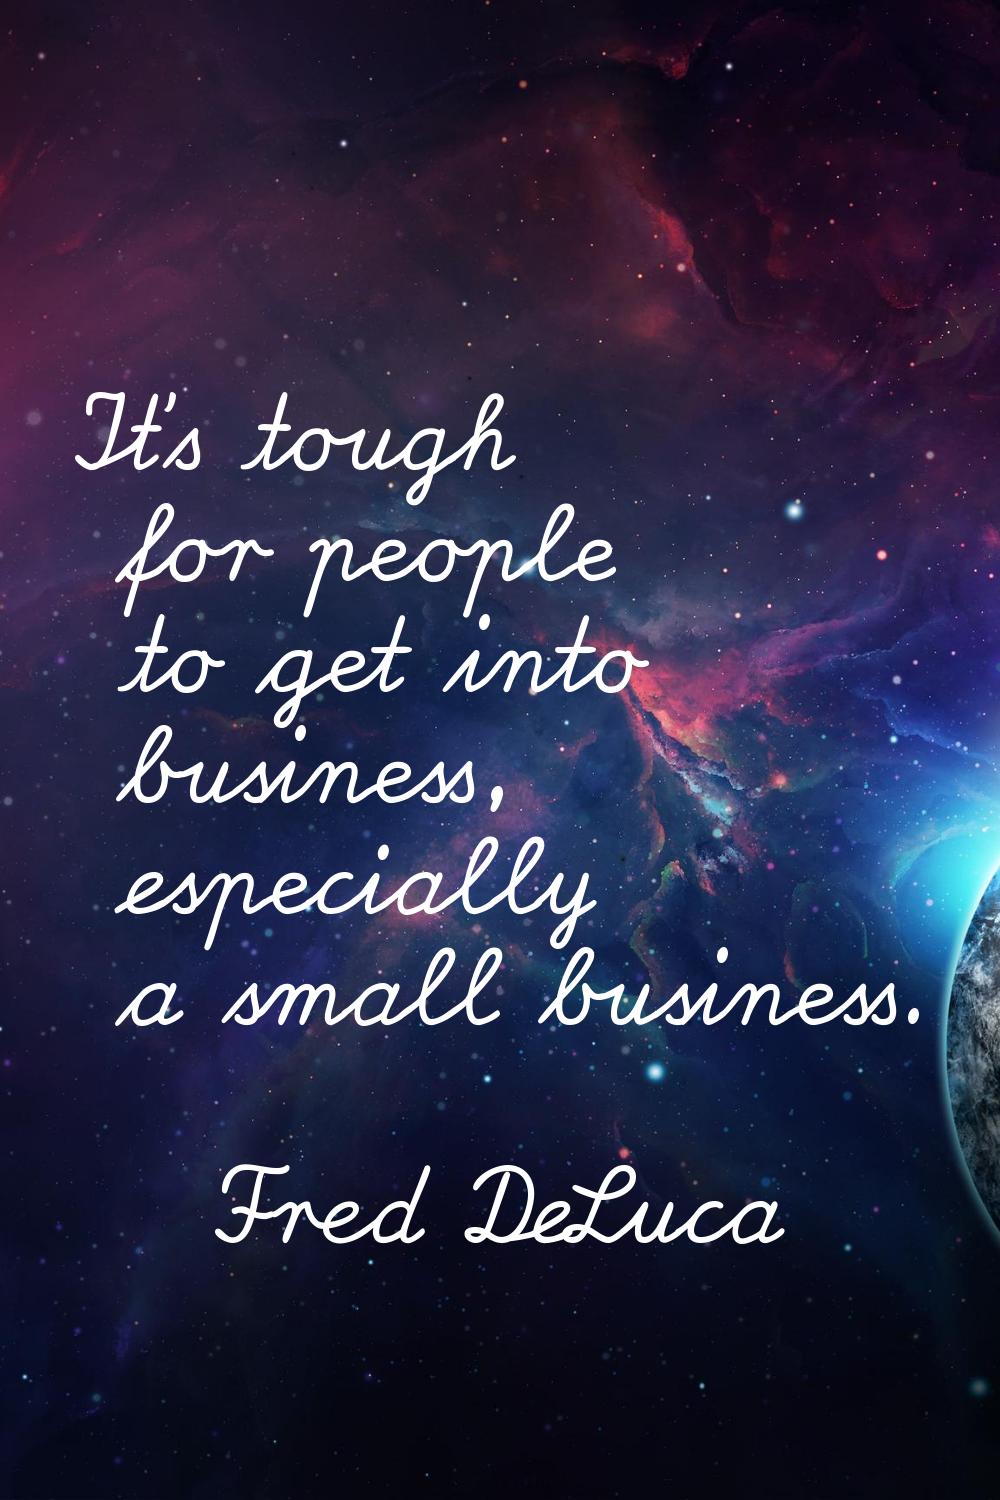 It's tough for people to get into business, especially a small business.